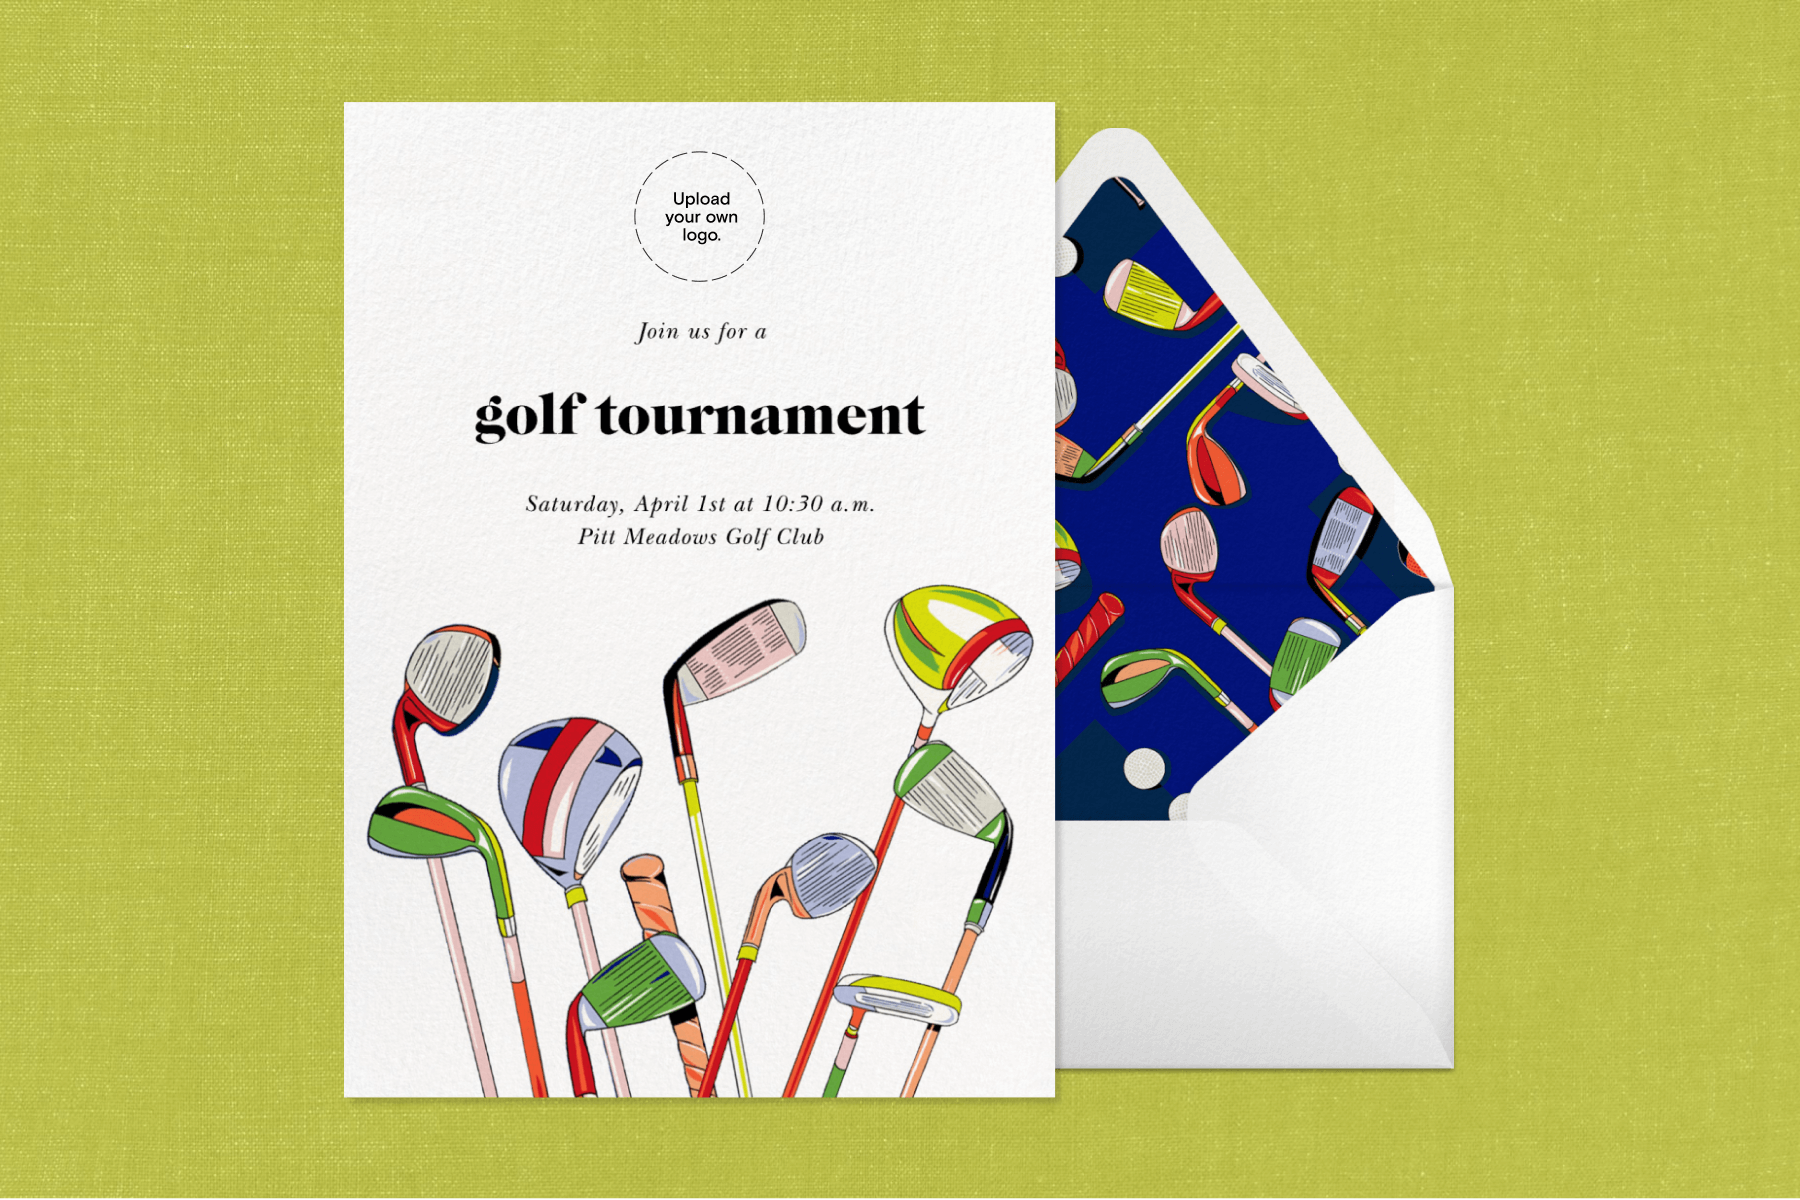 An invitation for a golf tournament with several colorful clubs shown head-side up alongside a matching envelope.